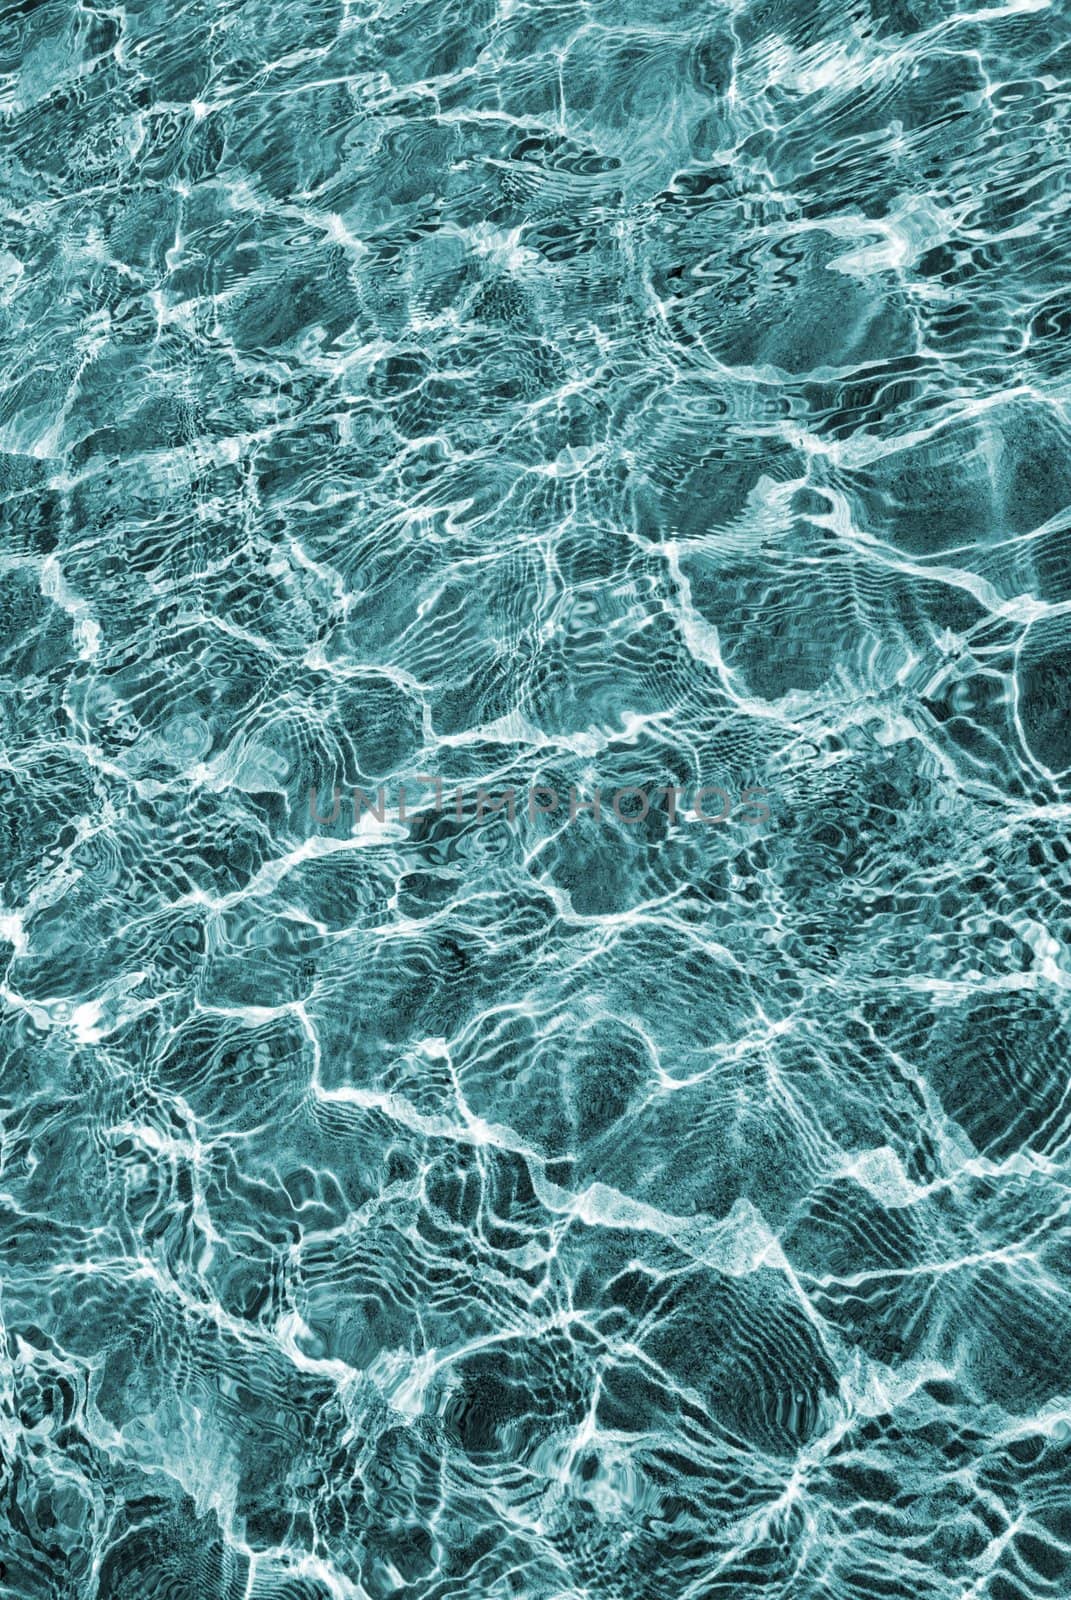 cyan water ripples by stockarch